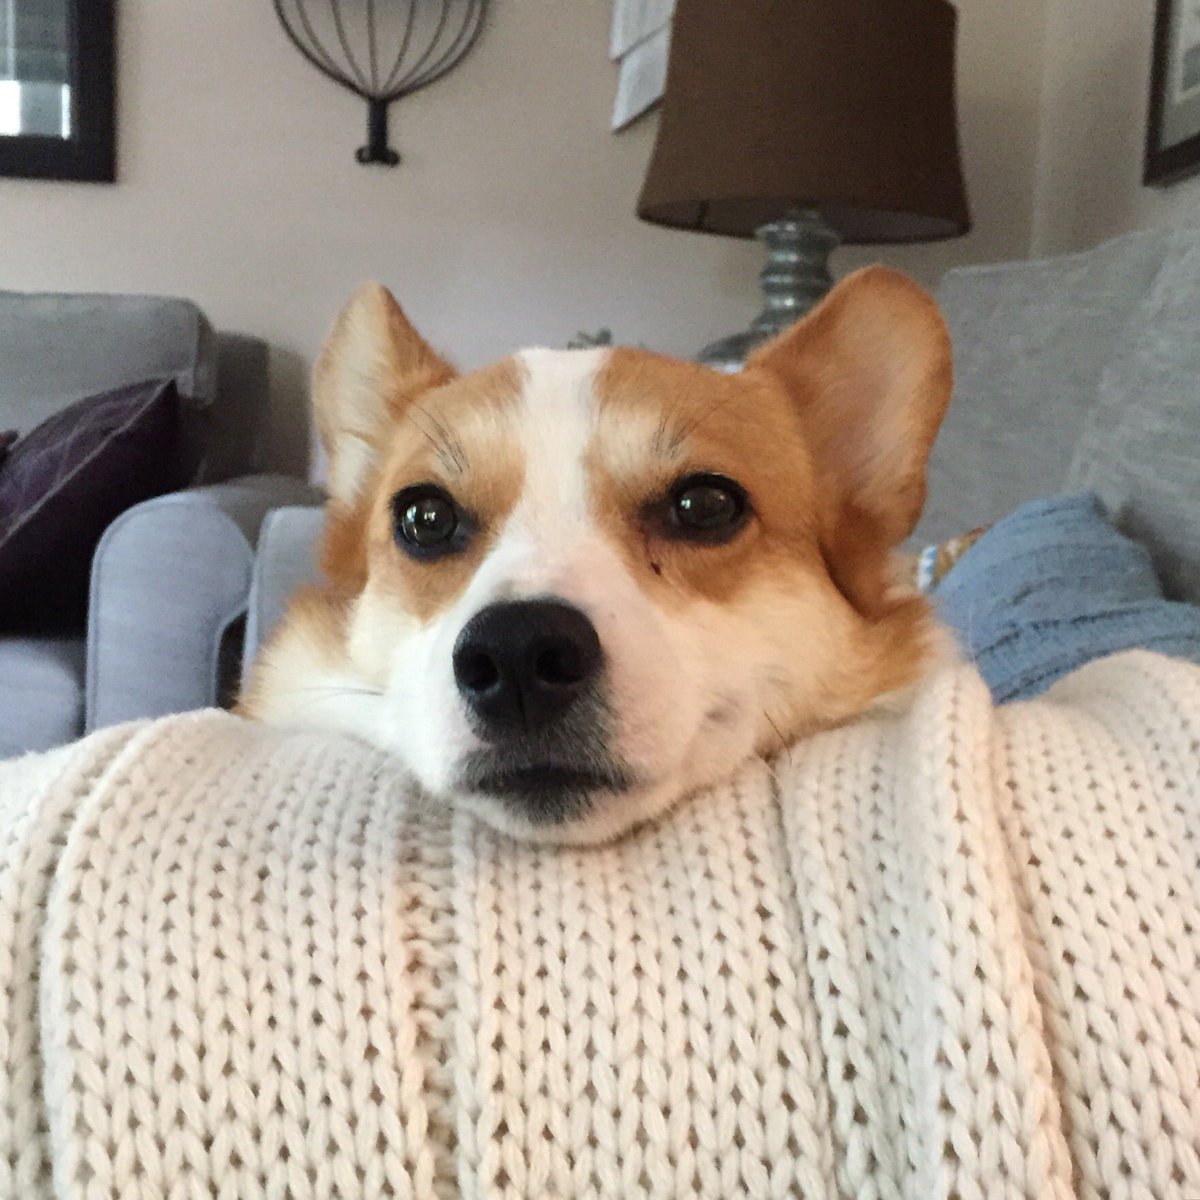 Dogs bring so much into our lives that I sometimes wonder how we can ever repay them. Clementine was like a gift. Here is her story: lindaksienkiewicz.com/queen-clementi…
#dogsoftwitter #dogstory #corgi #mondayblogs